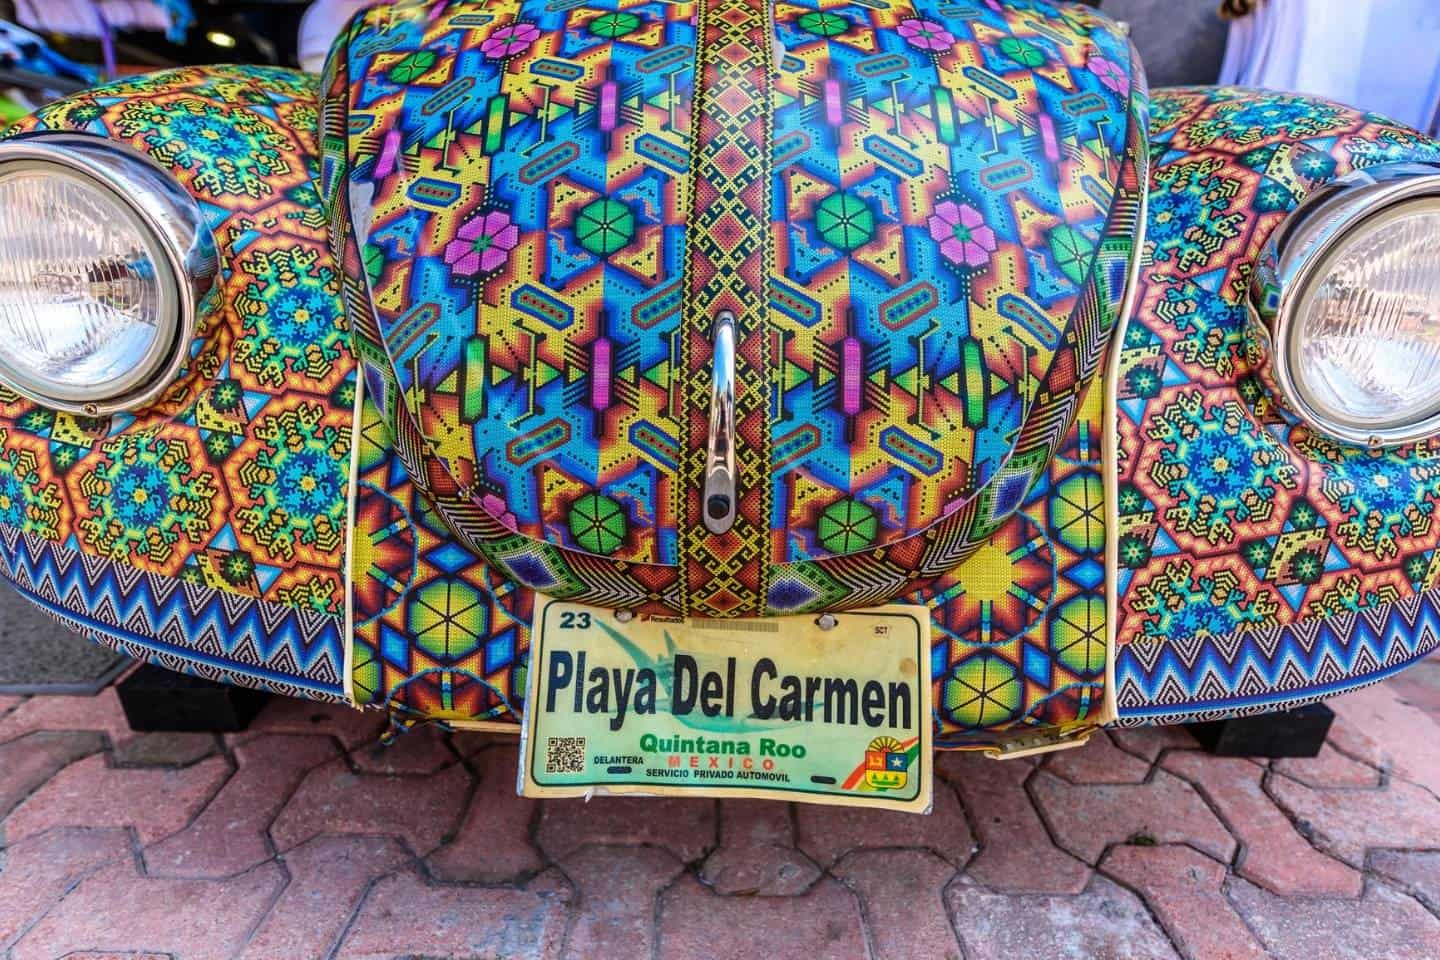 Colored vintage car with Playa del Carmen lettering, Quintana Roo, Mexico